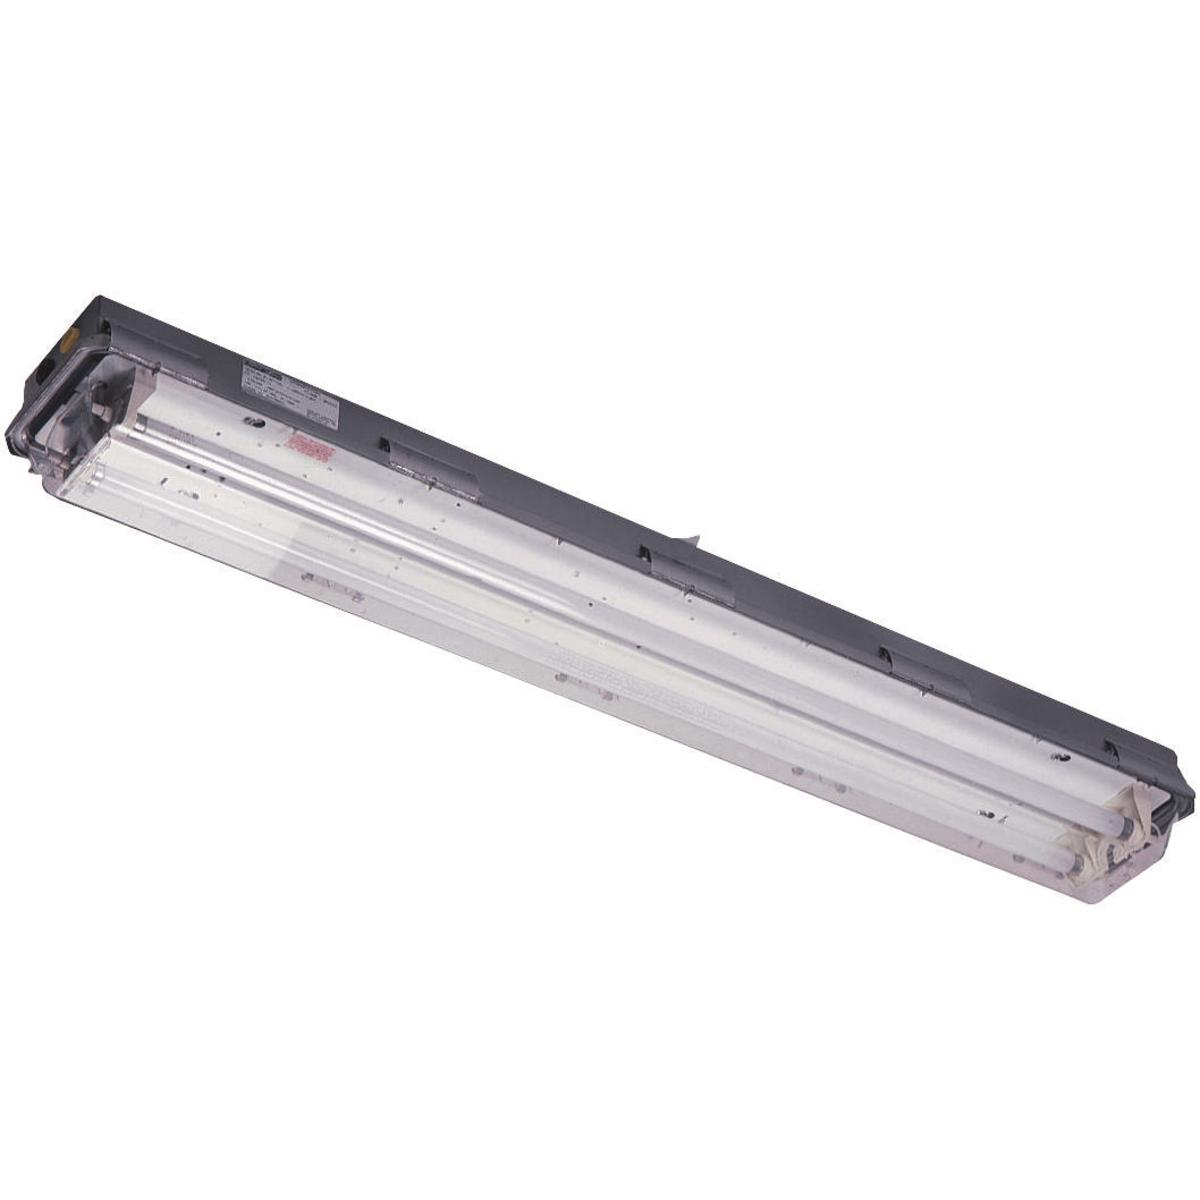 Hubbell LZ2S28330 LZ2S Series - Stainless Steel 28 Watt Fluorescent Light Fixture (Three 4-Foot Lamps Not Included) - Double-Ended Lamp Type - 120-277V At 50/60Hz- Hub Size 3/4 Inch NPT  ; NEMA 4X & IP66 rated stainless enclosure with Lexan® impact resistant polycarbonate 